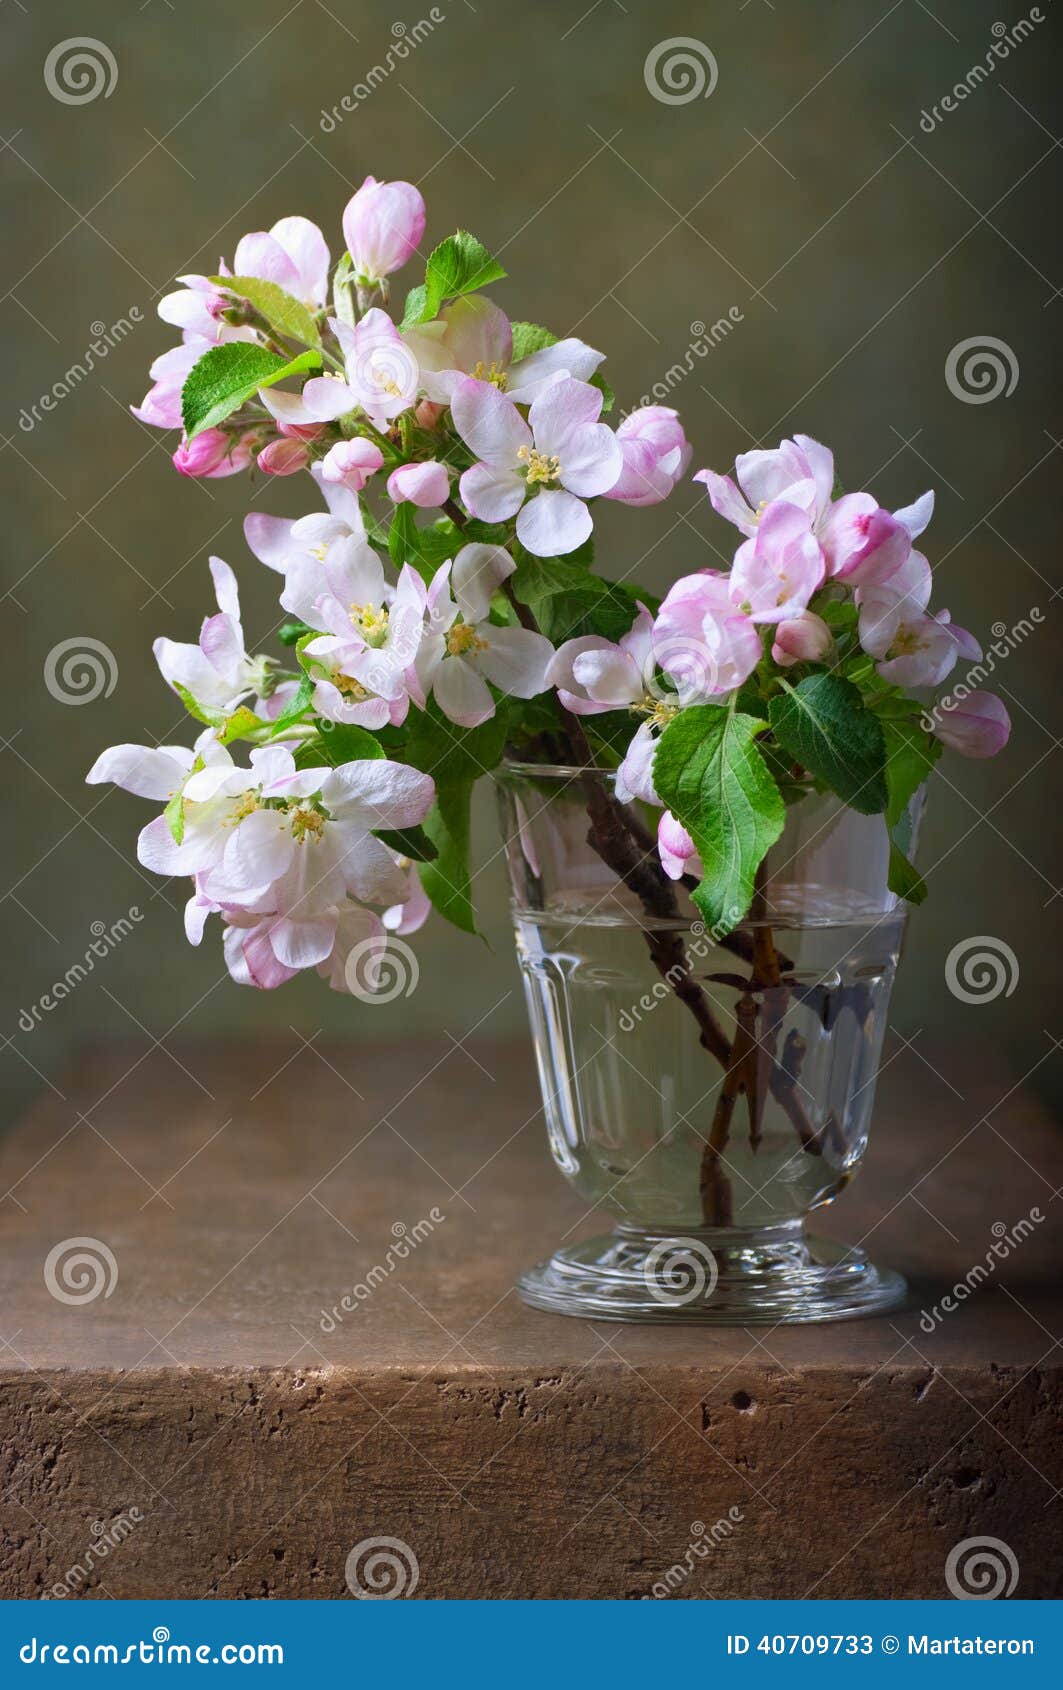 still life with blossoming apple tree